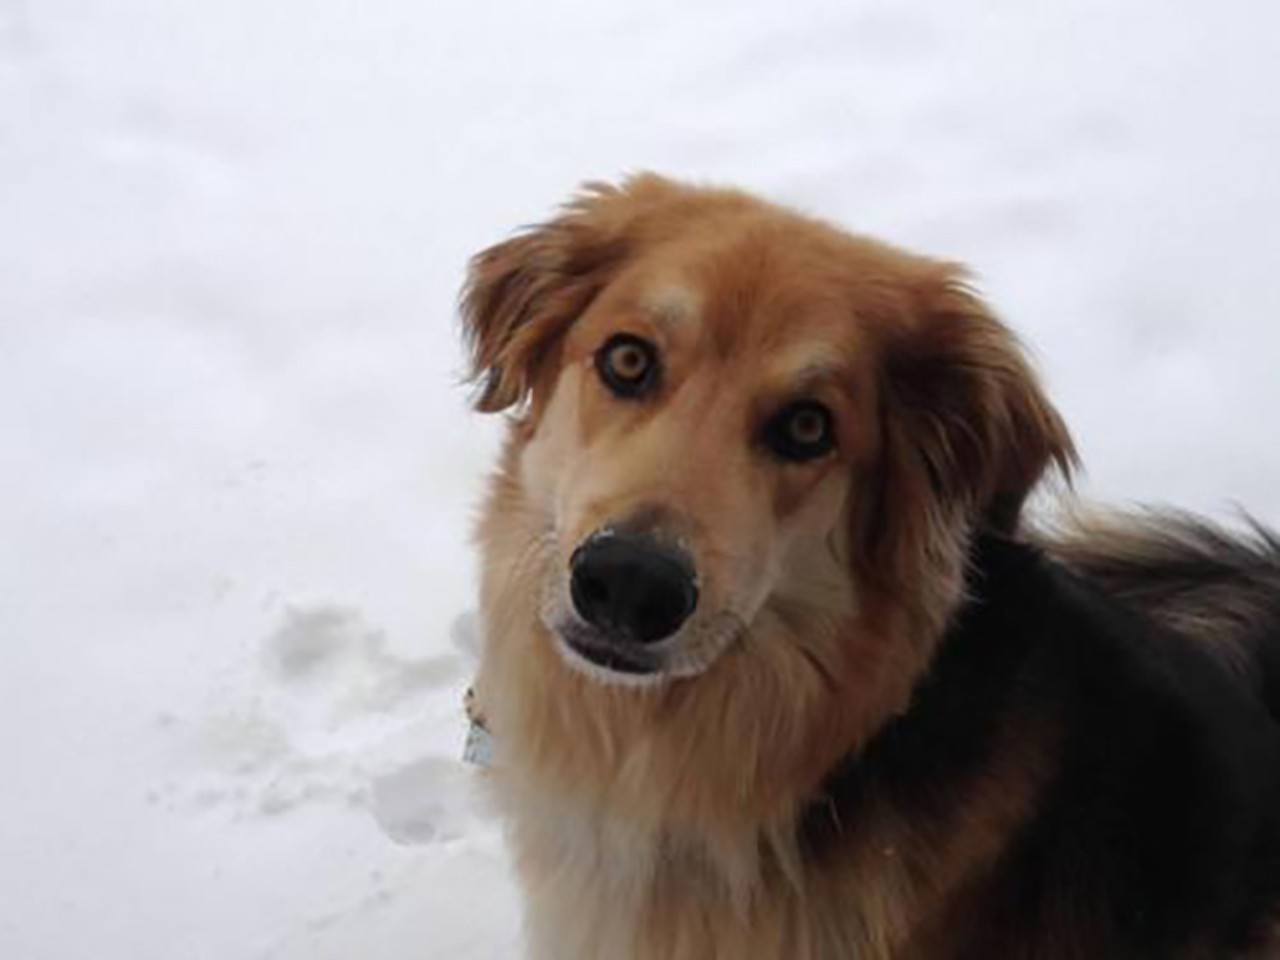 Hugo
Age: 8 years old | Breed: Shepherd/Collie Mix | Sex: Male | Rescue: Dream House Rescue 
Photo via dreamhouserescue.org